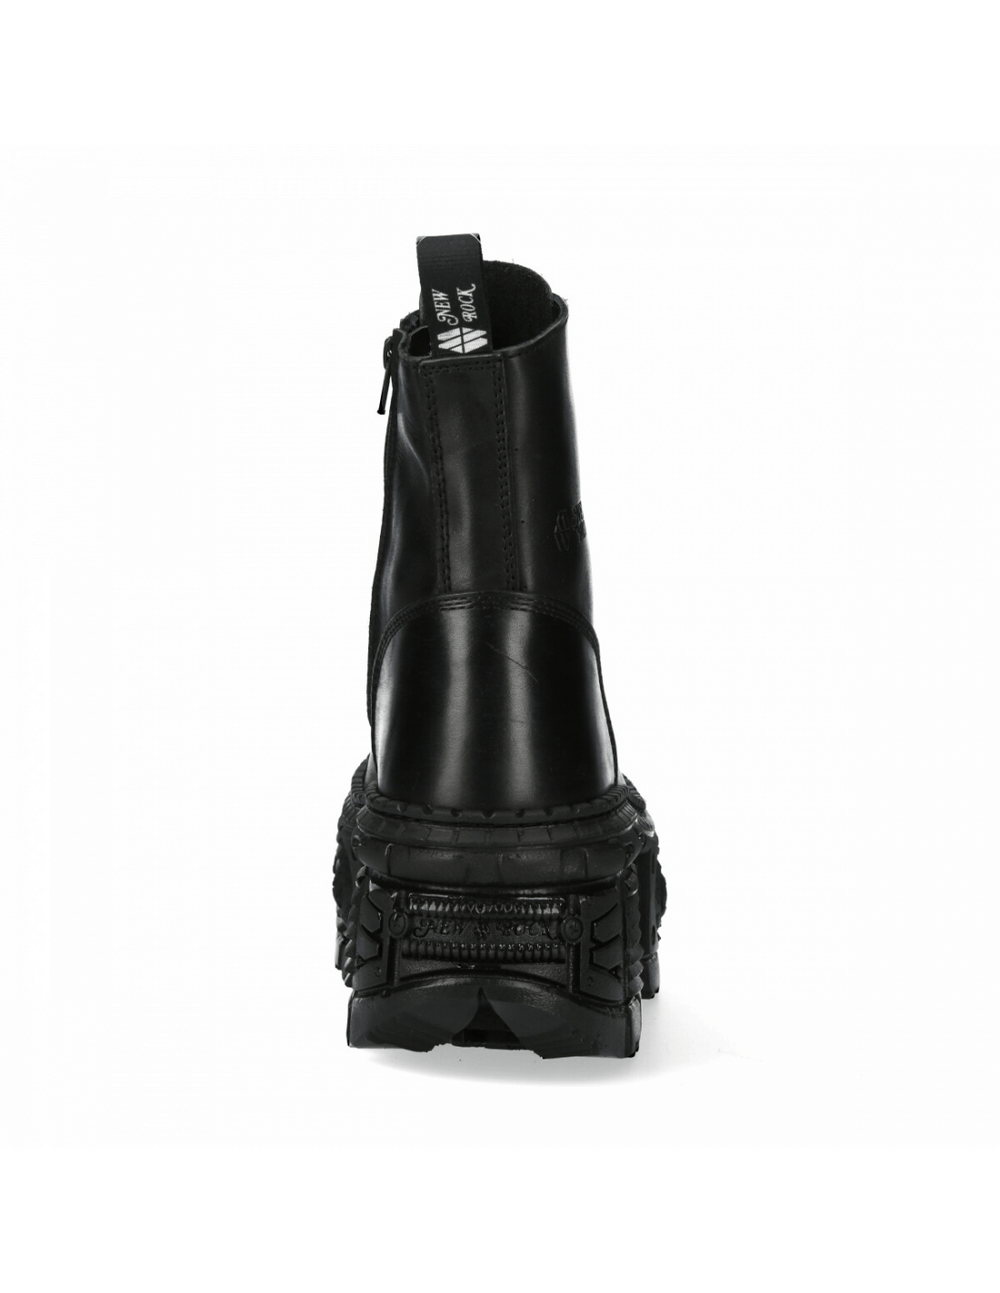 NEW ROCK Stylish Gothic Style Ankle Boots with Platform